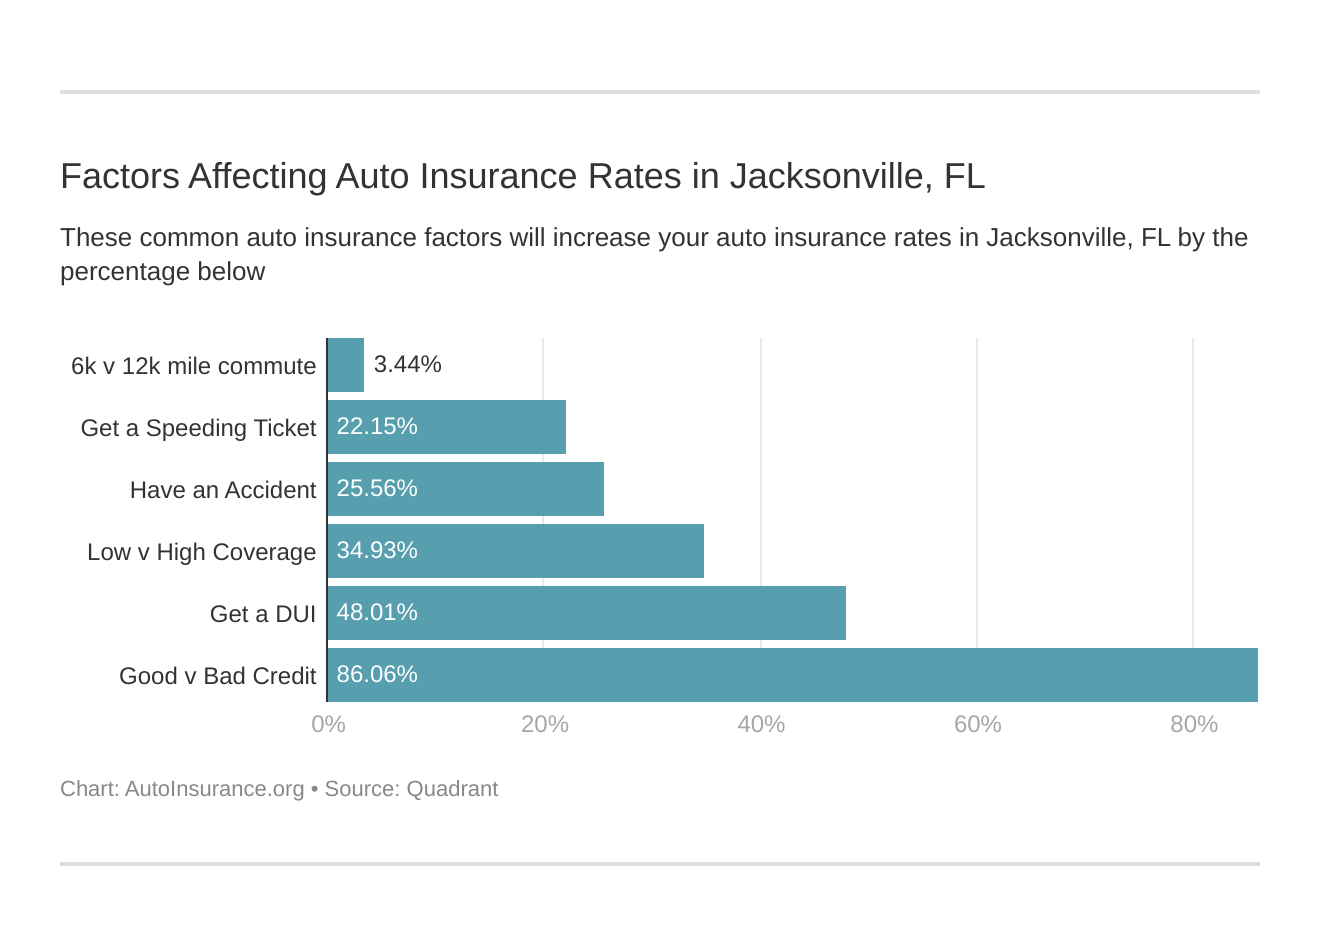 Factors Affecting Auto Insurance Rates in Jacksonville, FL